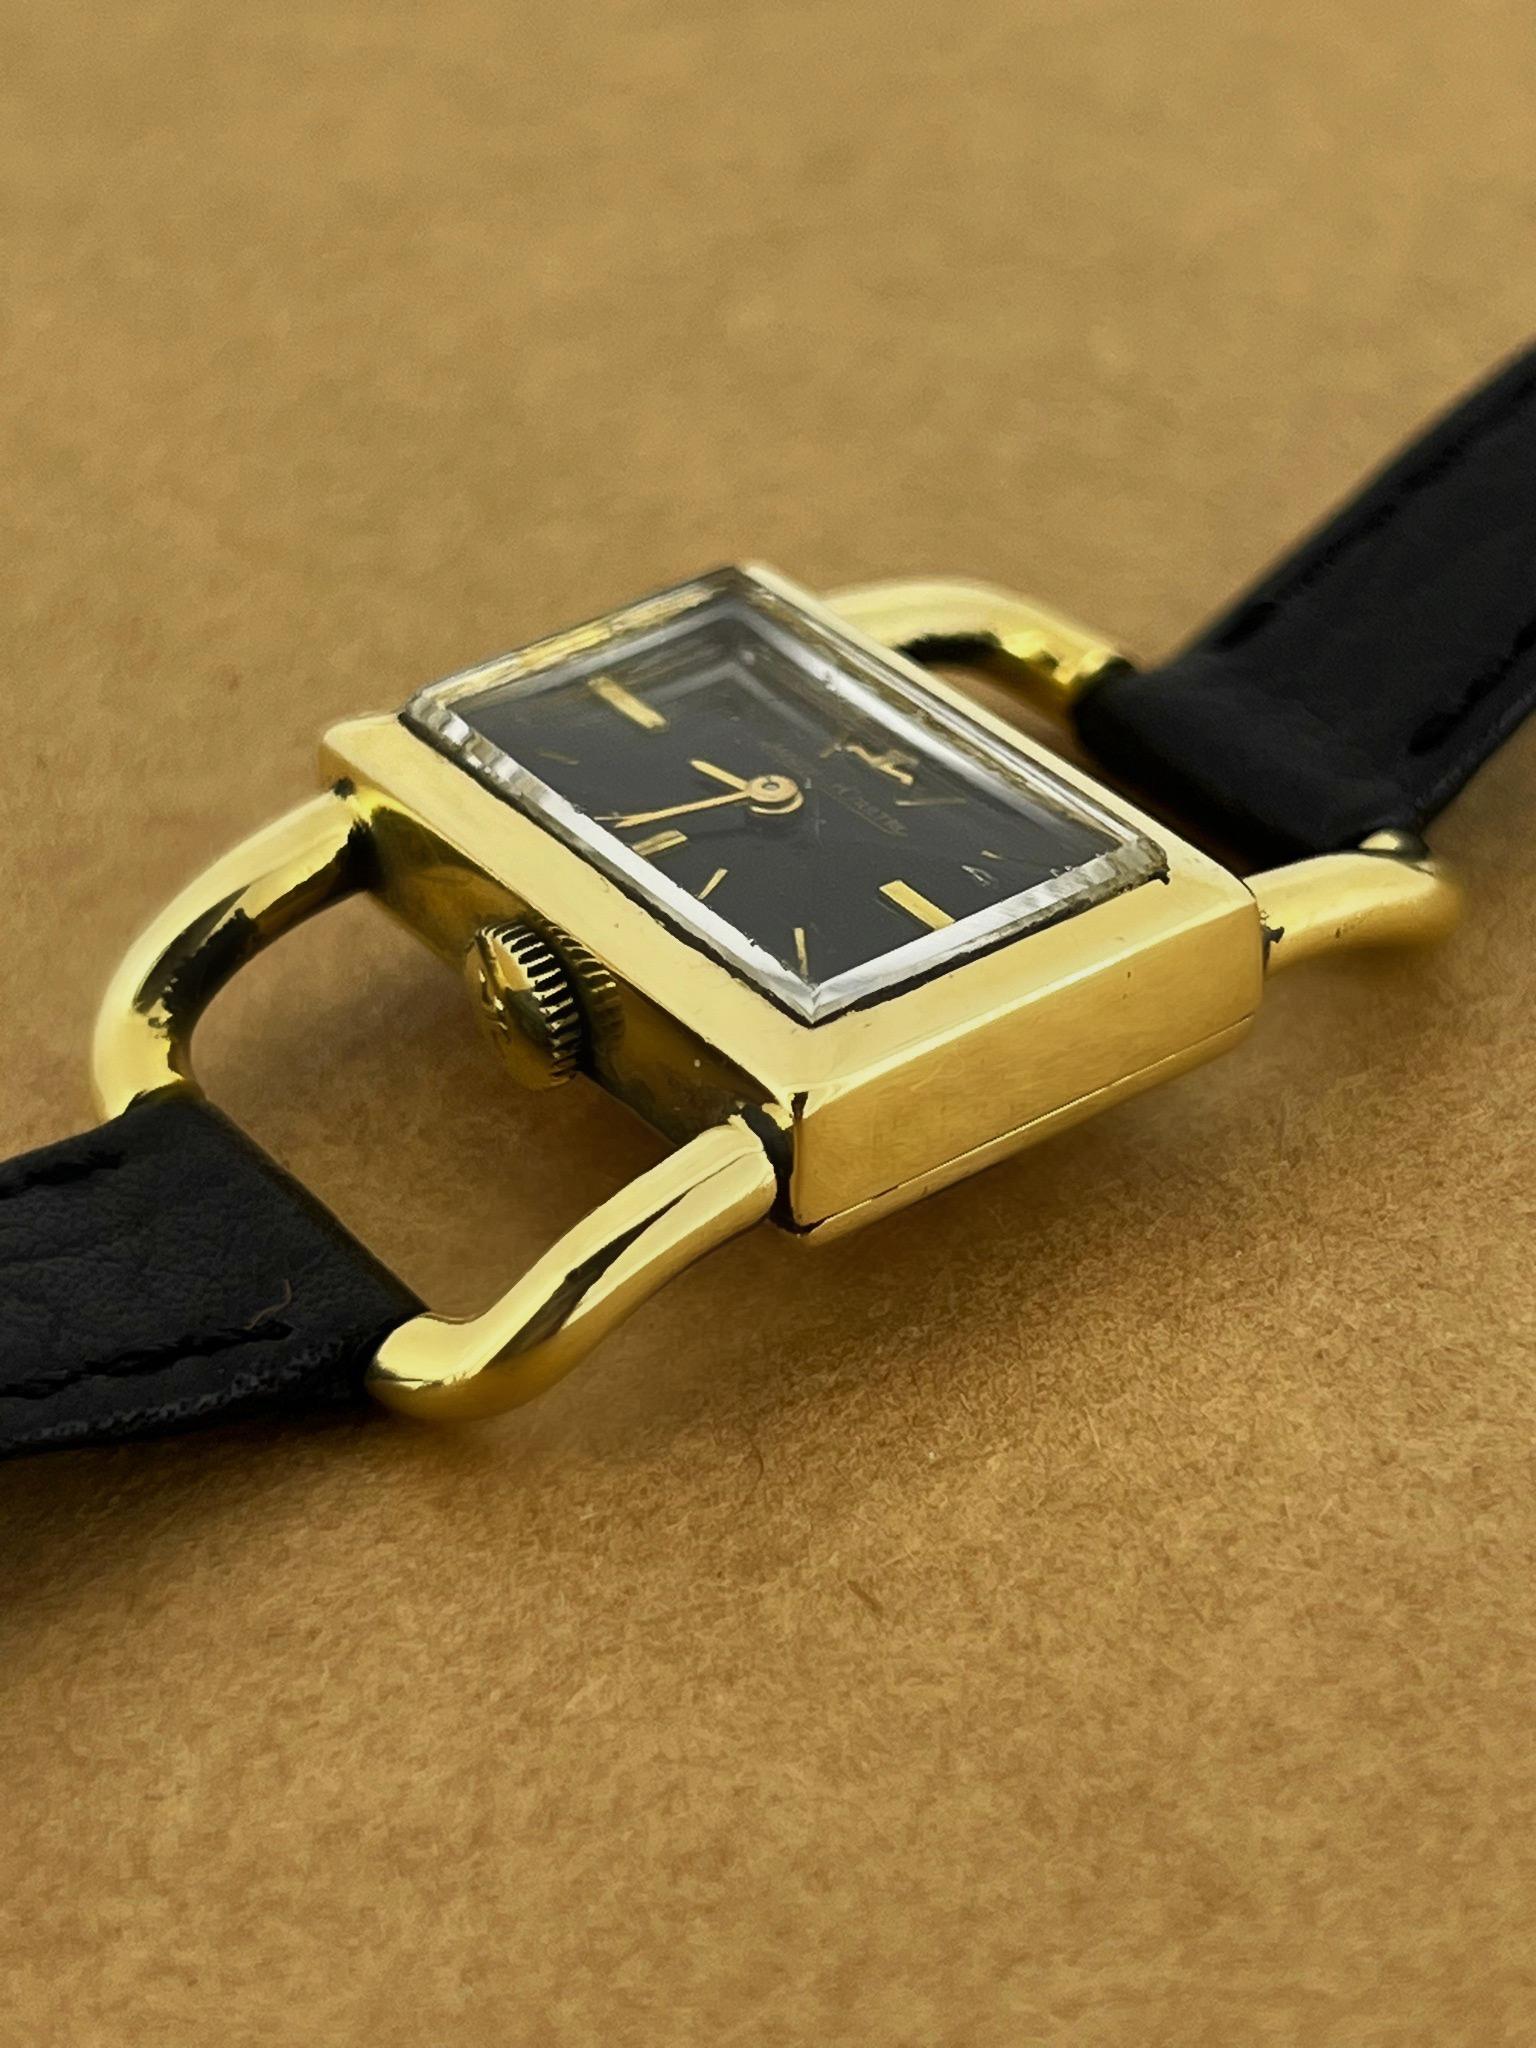 Jaeger-LeCoultre Értier Luchetto 18K Gold, Onyx Dial, Stirrup Lugs Ladies Watch For Sale 1